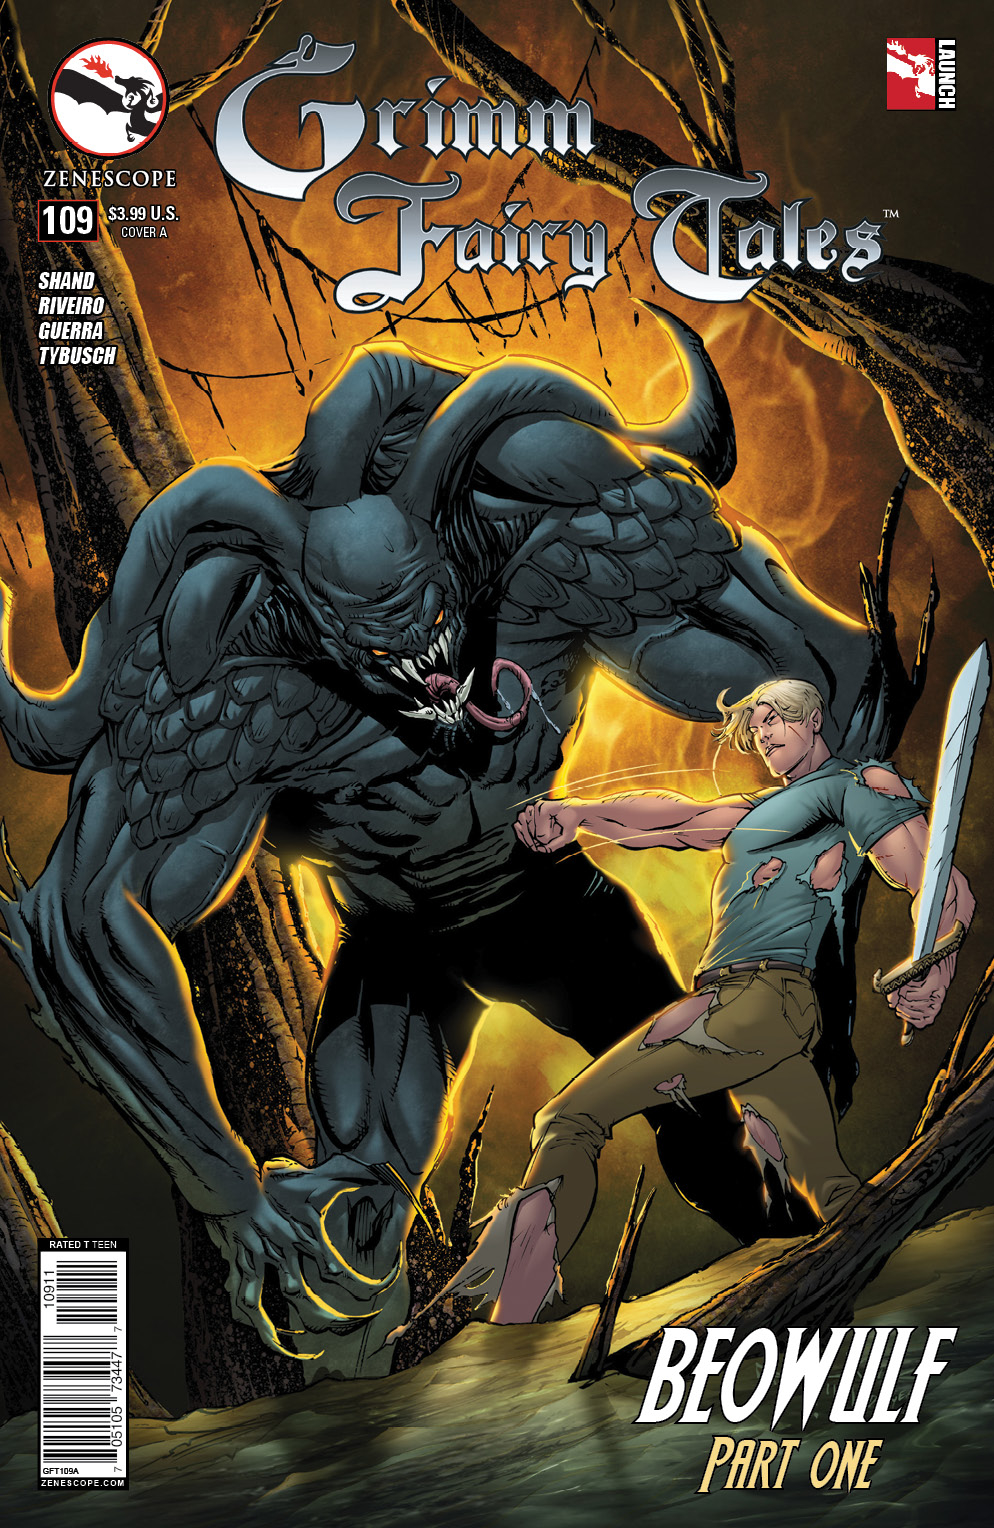 GFT GRIMM FAIRY TALES #109 BEOWULF A CVR QUALANO (MR)